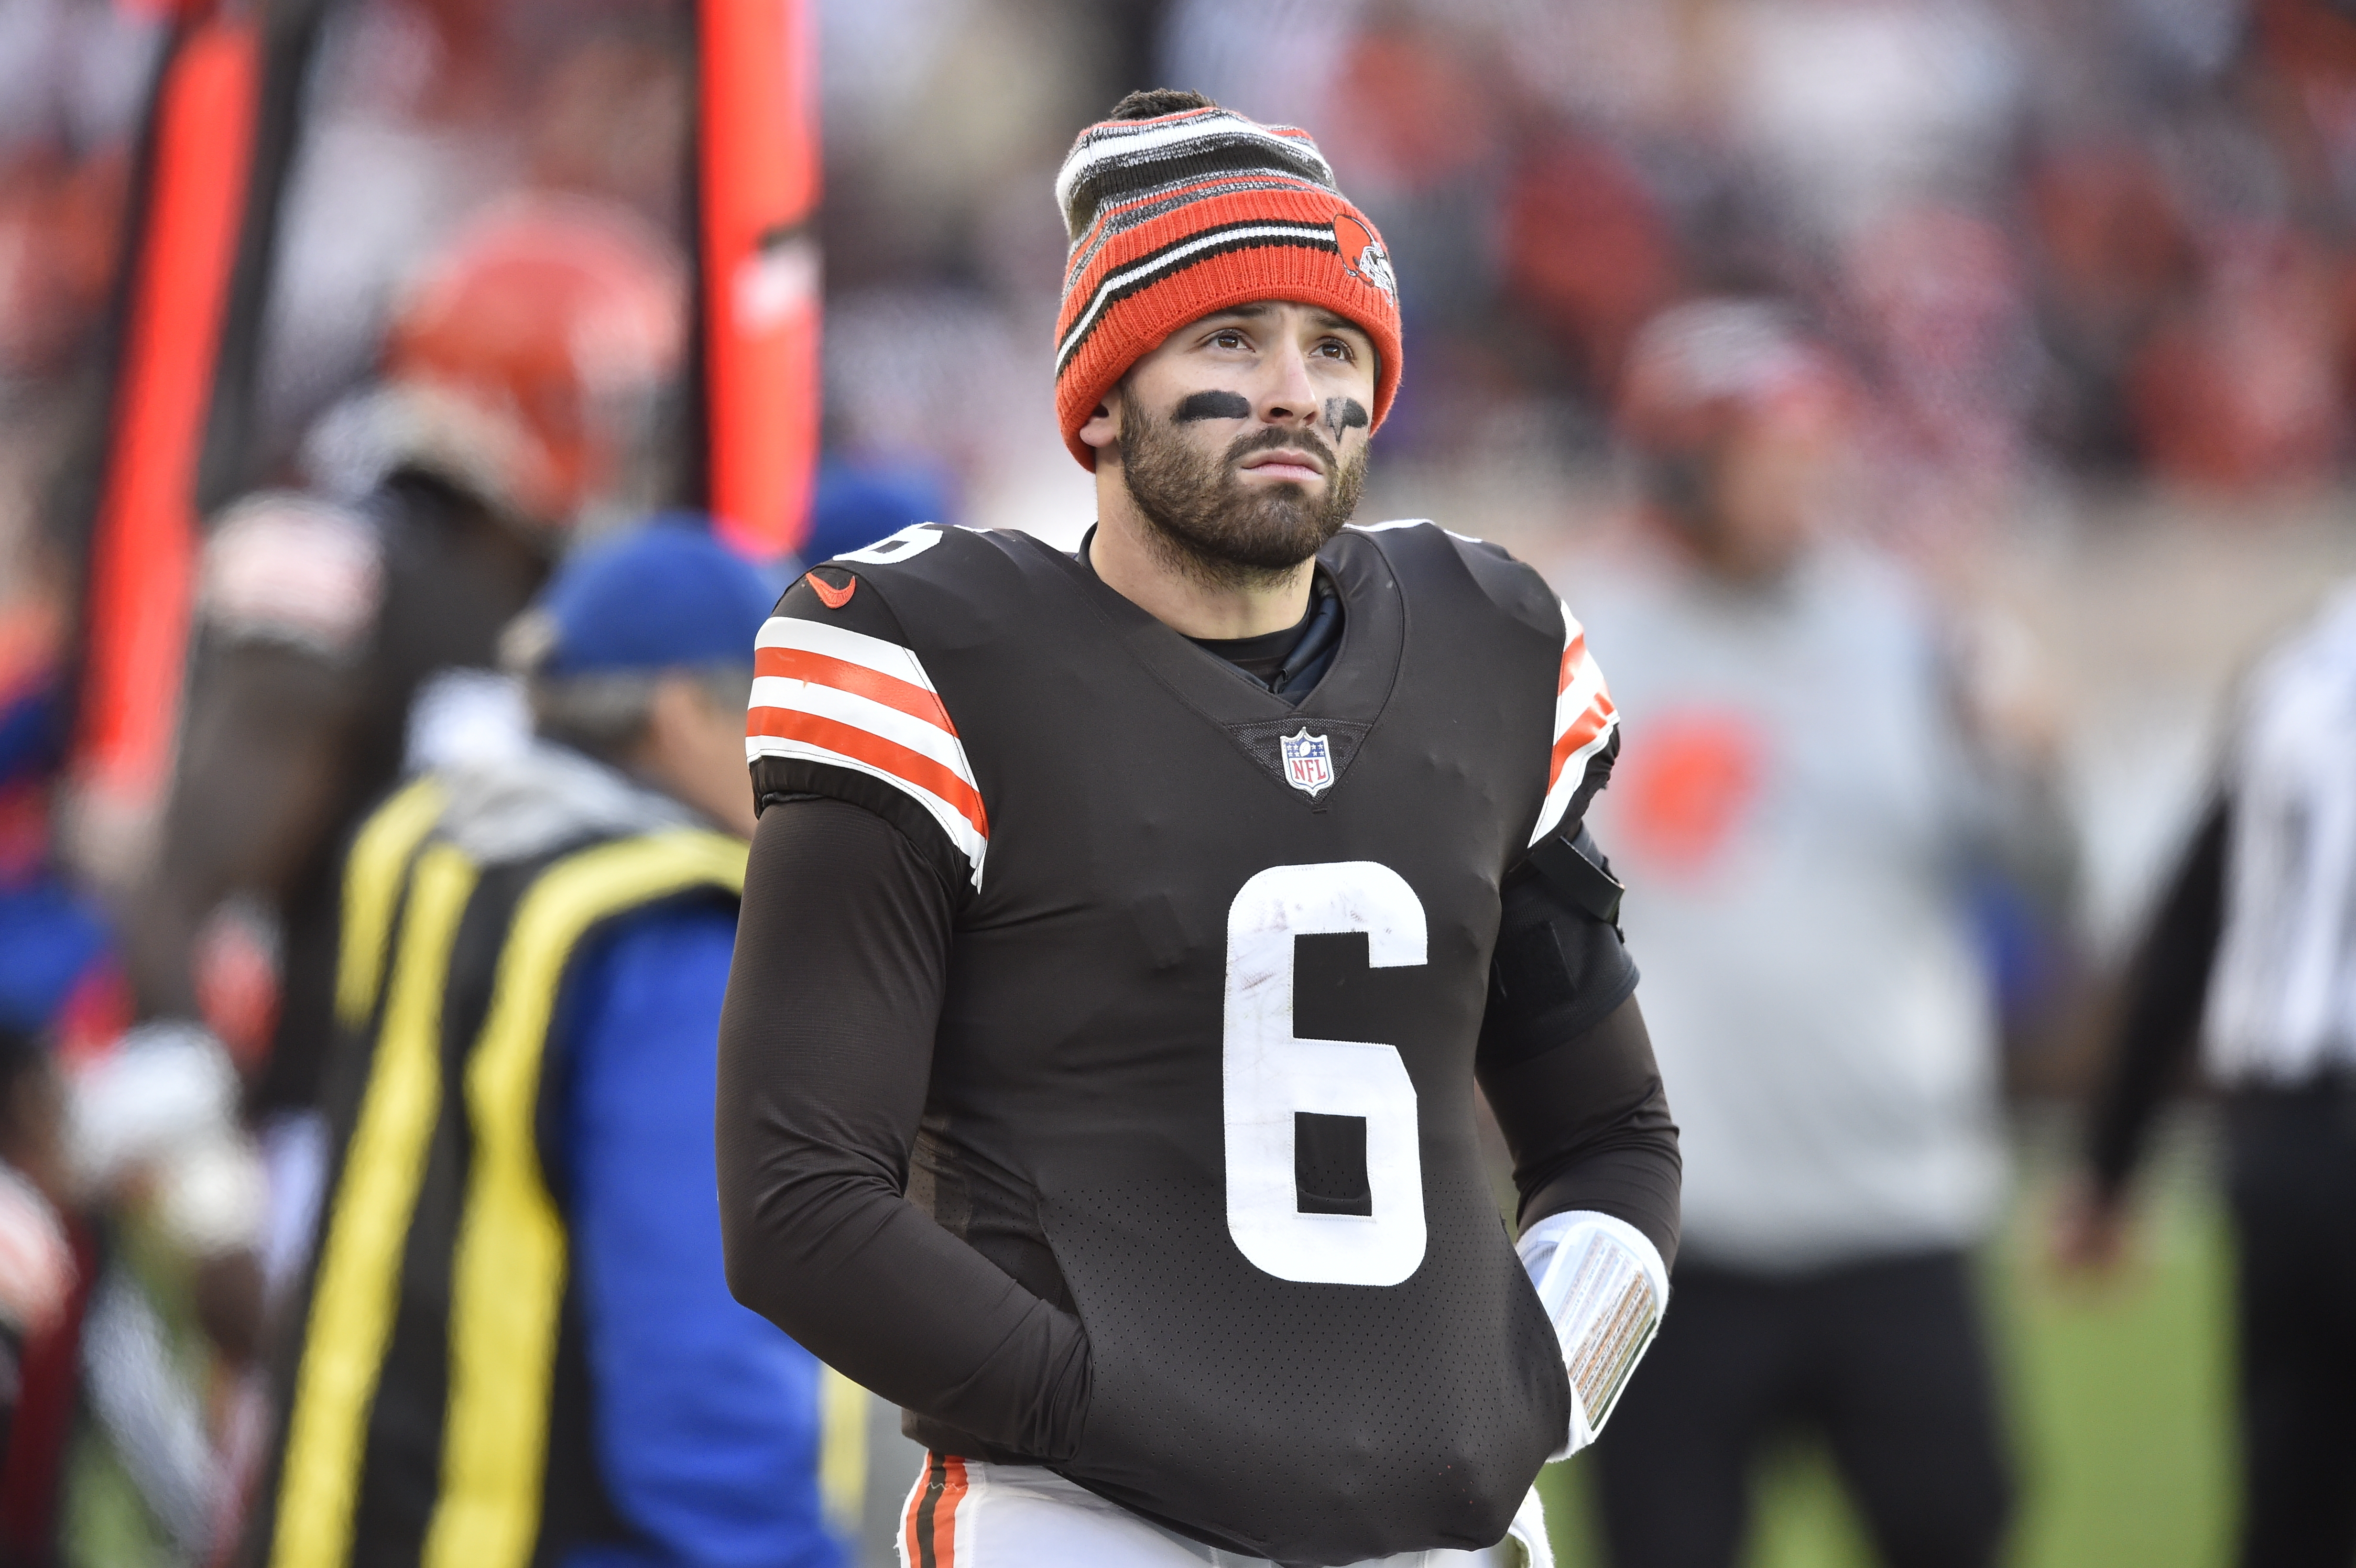 Seahawks' Drew Lock has a rough night, Panthers' Baker Mayfield